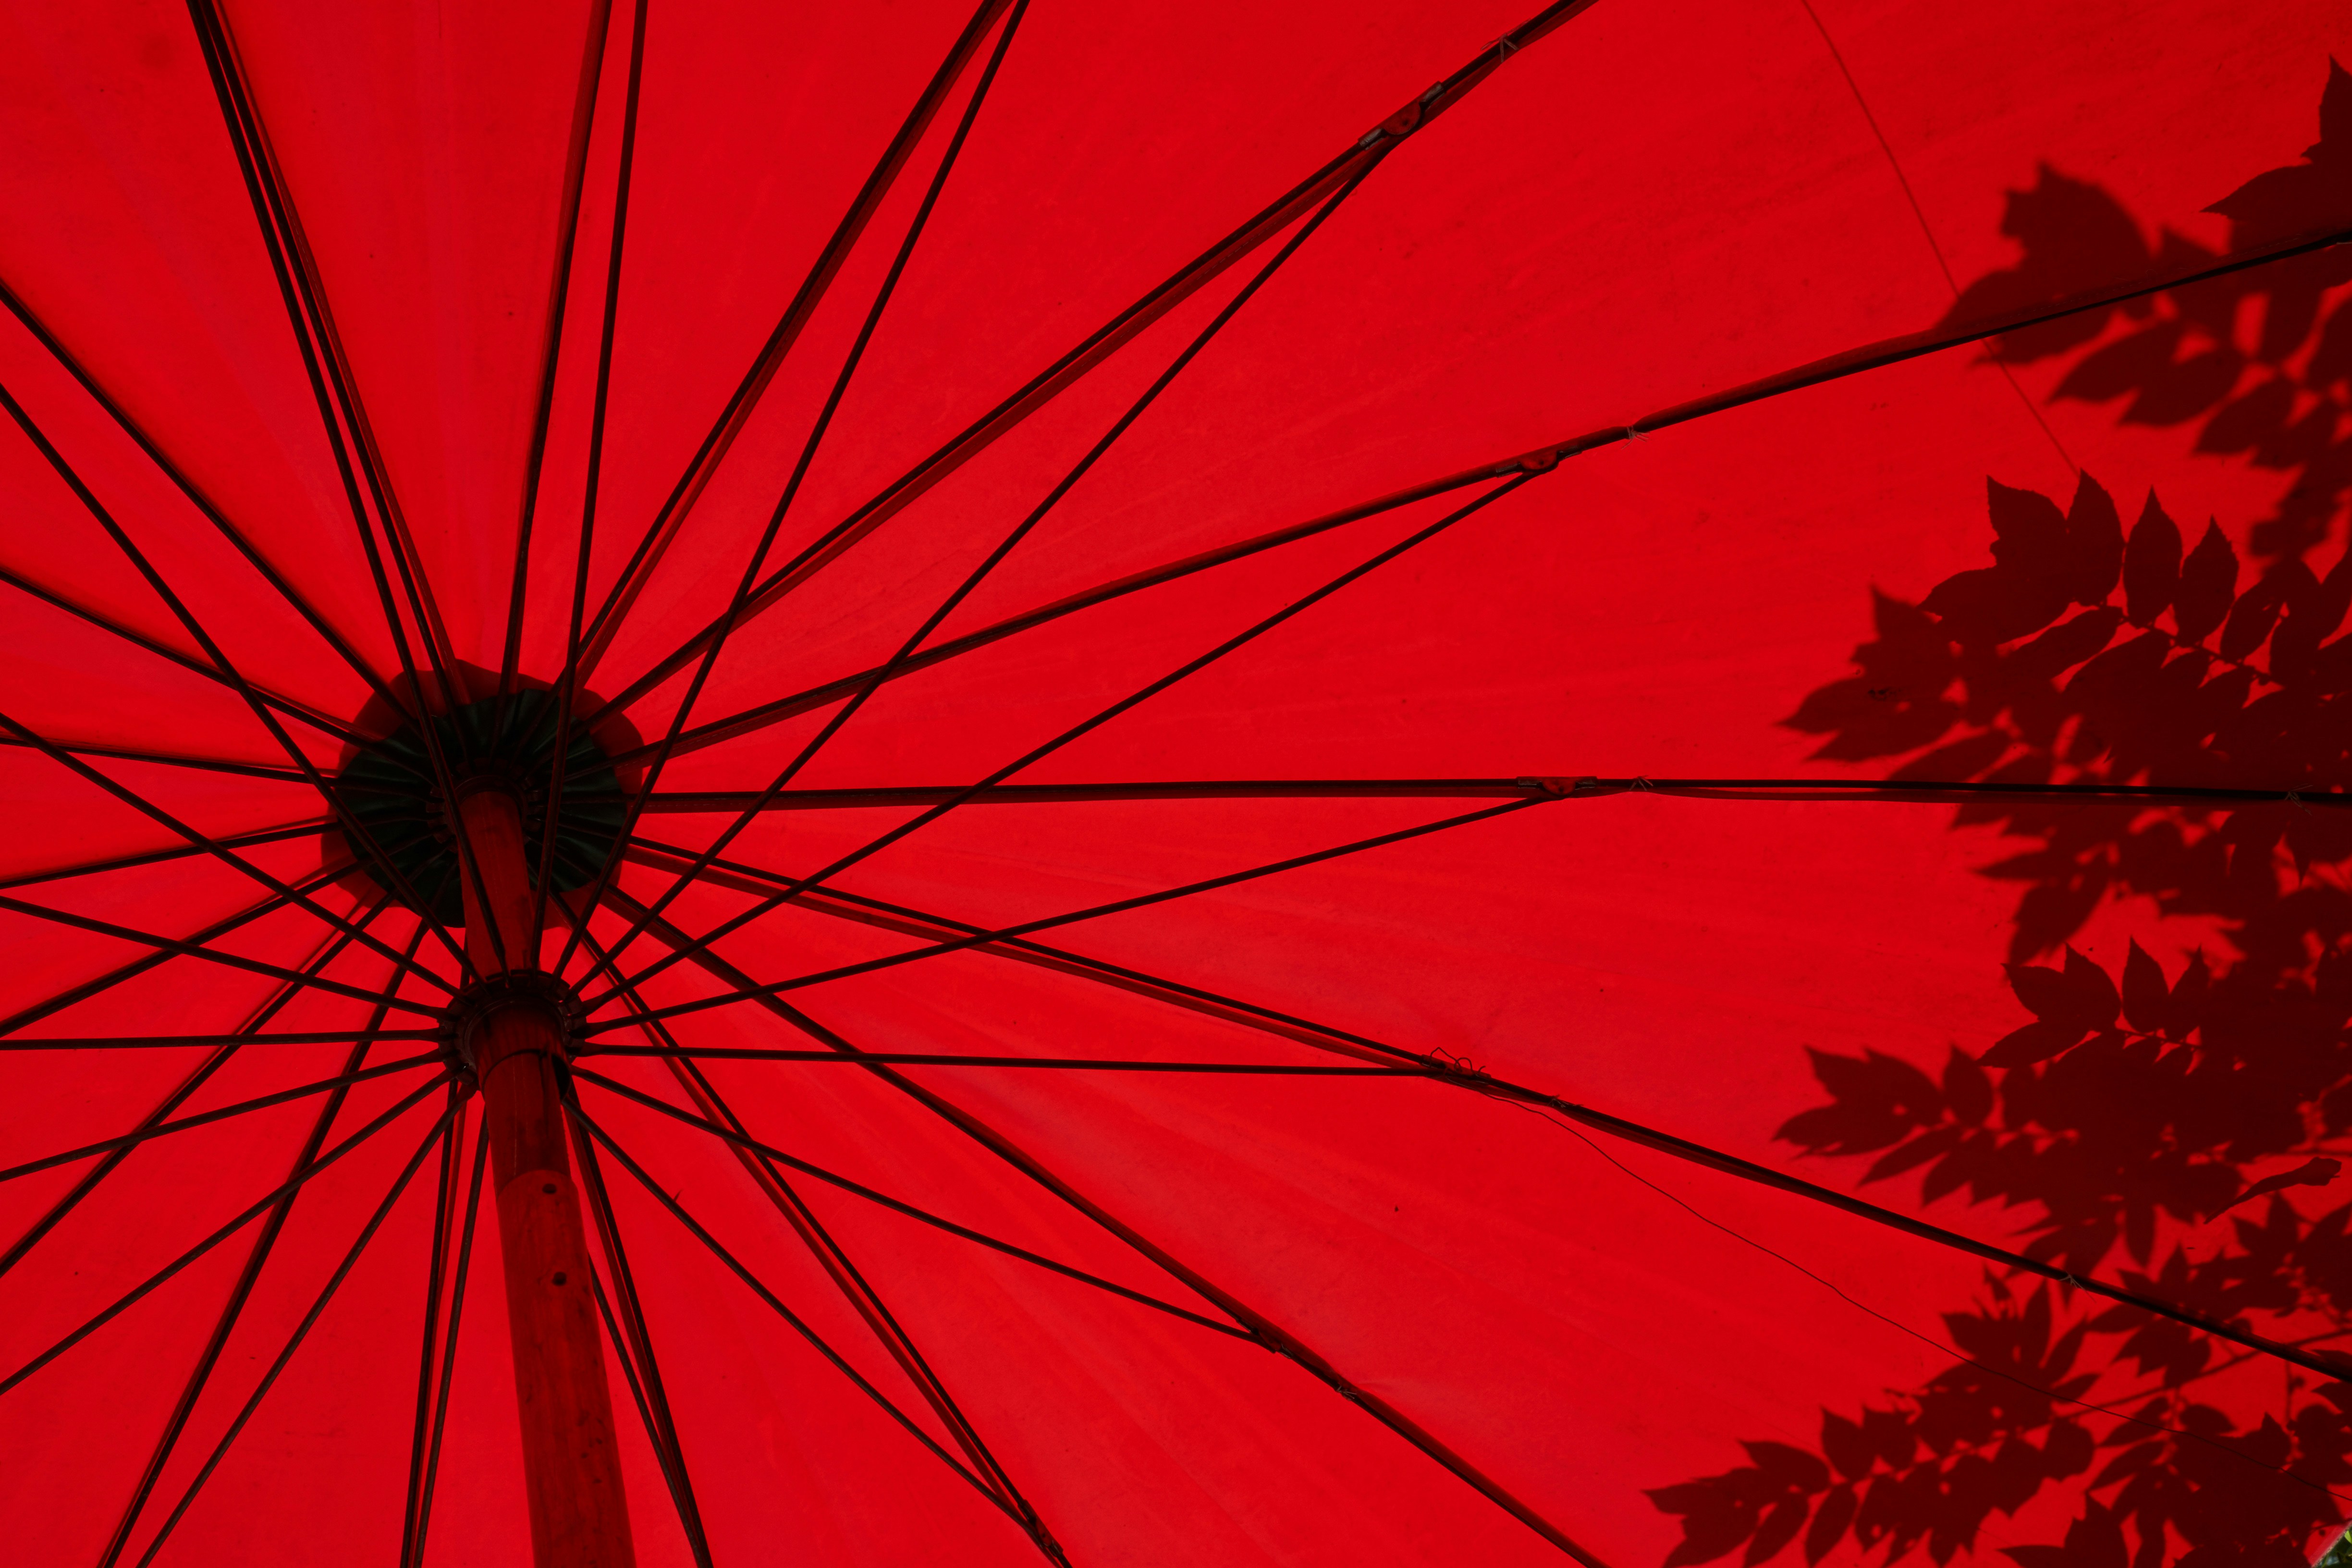 Red umbrella - sex workers' rights